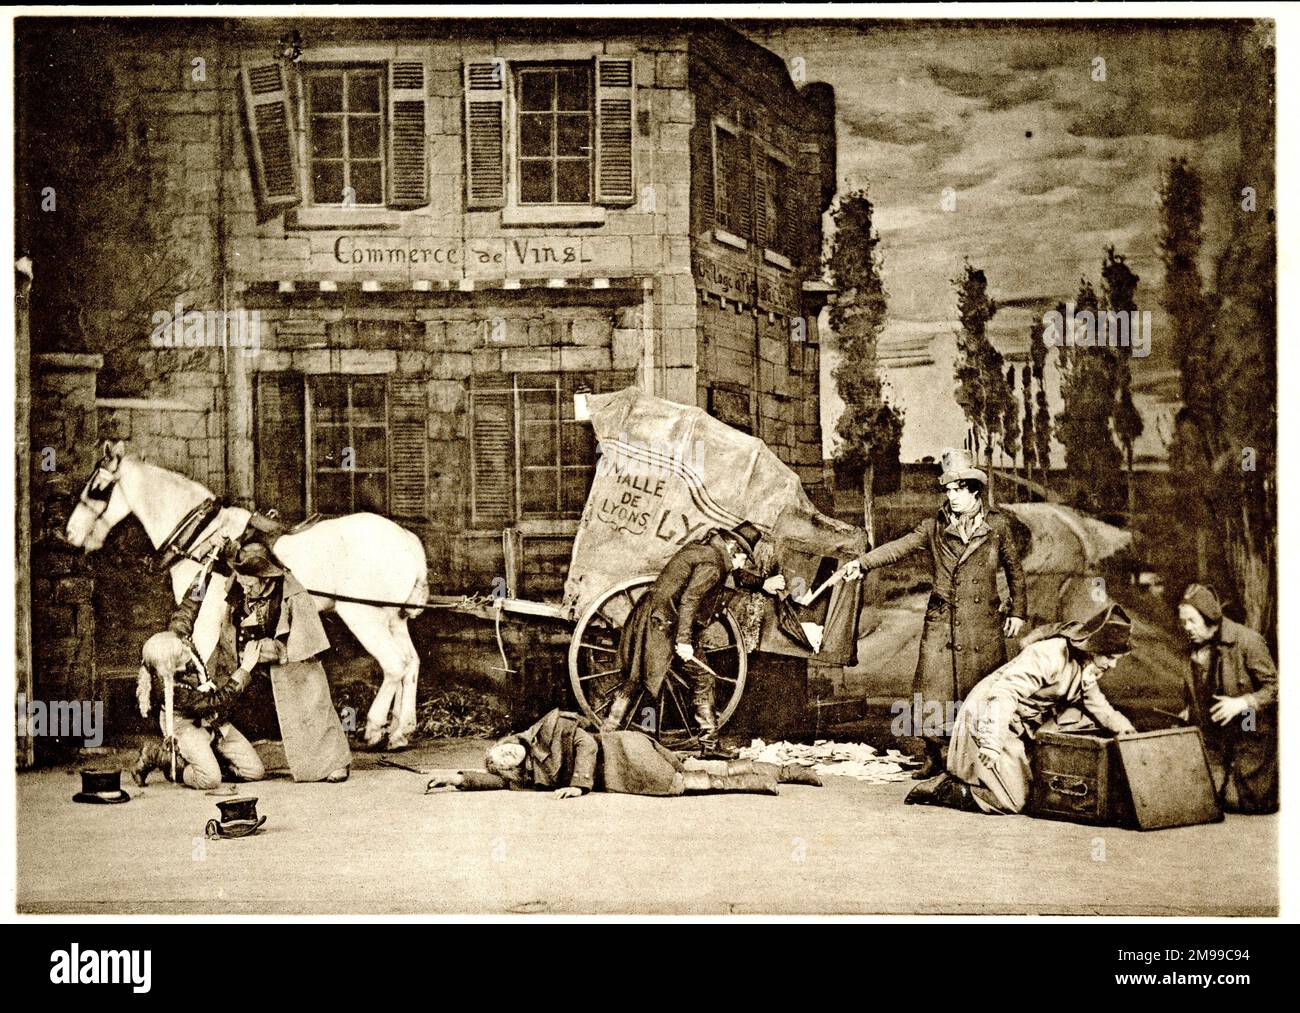 Highway robbery in a play, The Lyons Mail, written by Charles Reade in 1854, produced at the Shaftesbury Theatre, London, in 1909 - based on a real incident during the French Revolution (27-28 April 1796) when a mailcoach was ambushed outside Paris, money was stolen and people were killed. Stock Photo